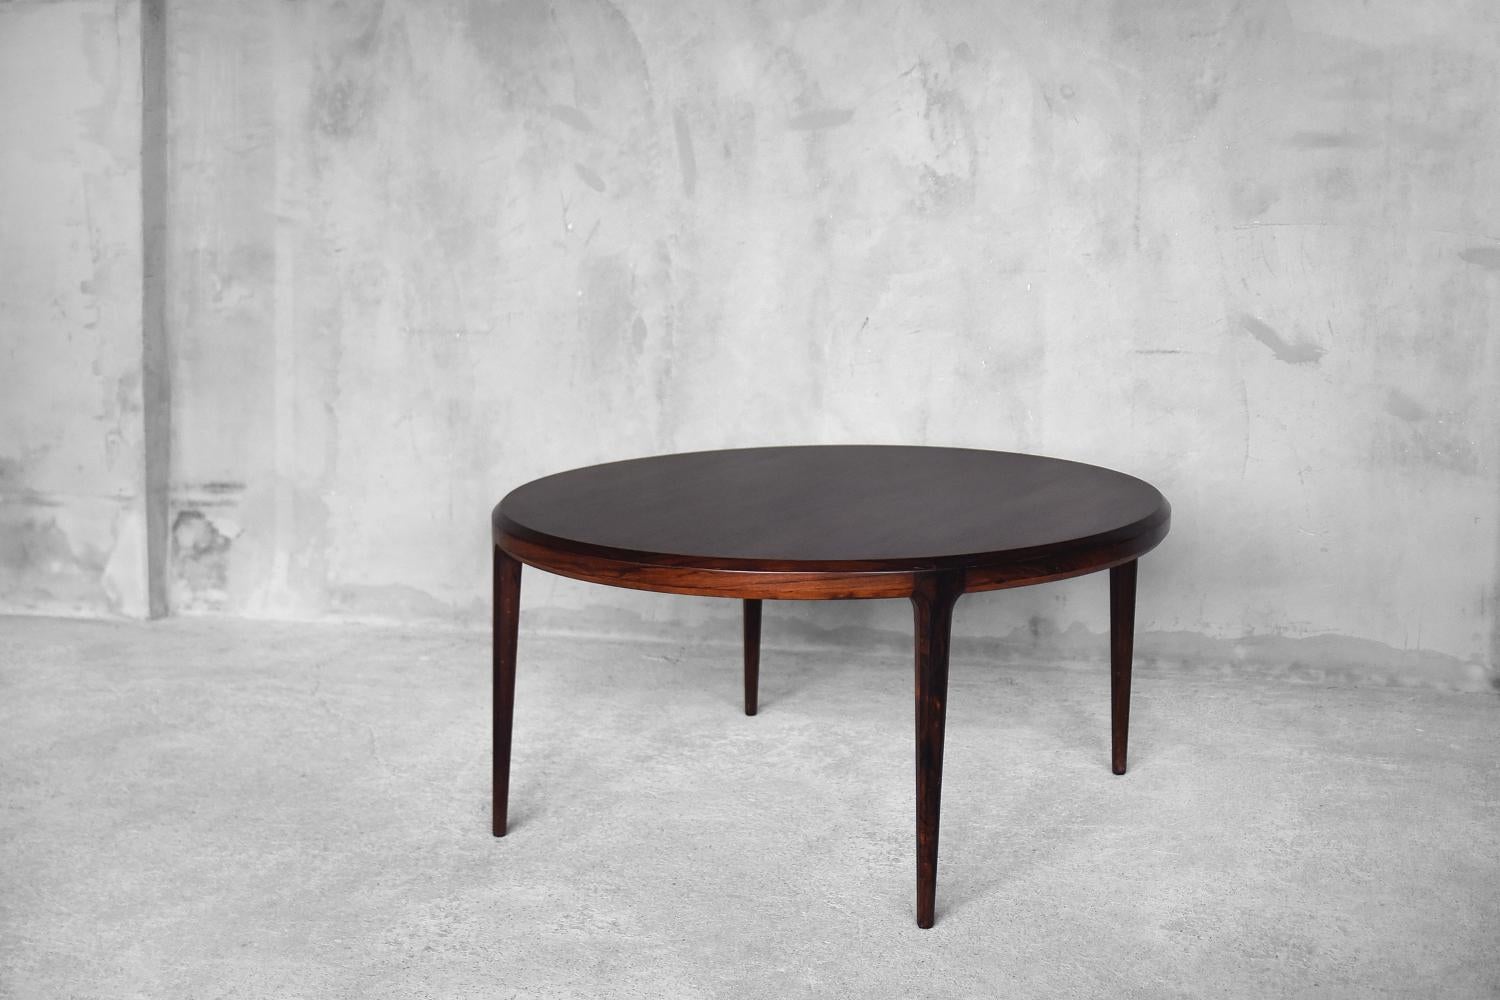 This gorgeous rosewood coffee table was designed by Johannes Andersen for C.F.C. Silkebørg and manufactured in Denmark during the 1960s. It is a model number 283. This series of tables was one of Andersen's most popular. The unique construction